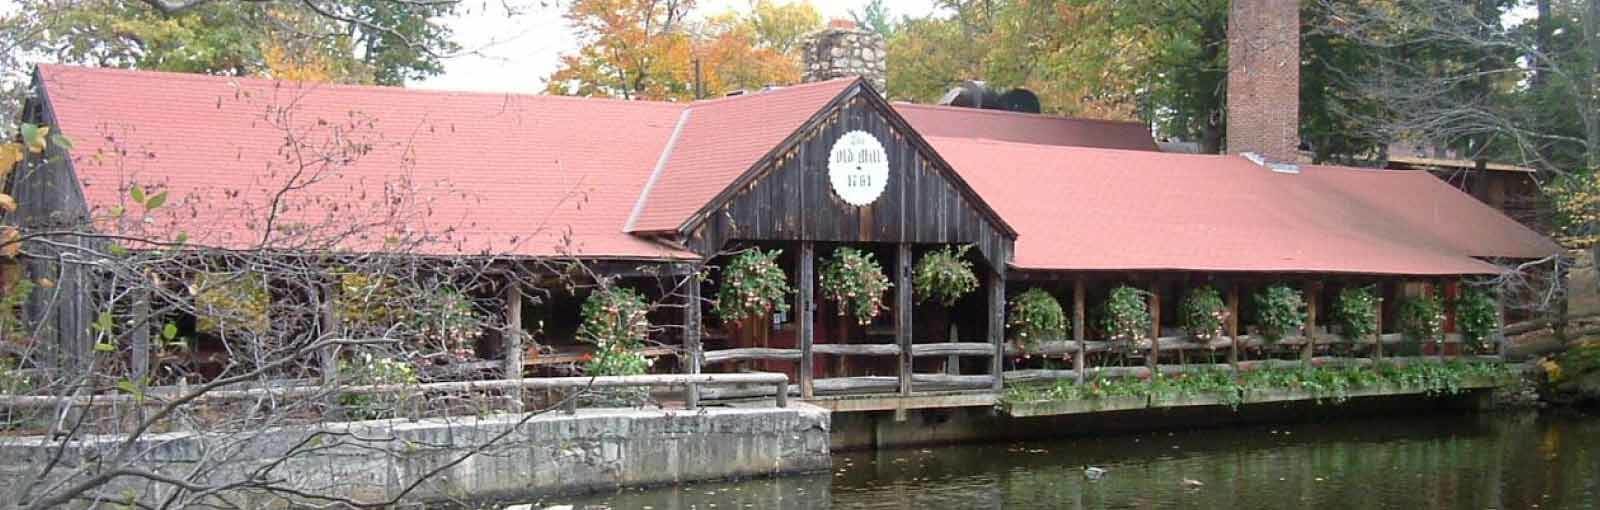 Old Mill Restaurant & Country Store